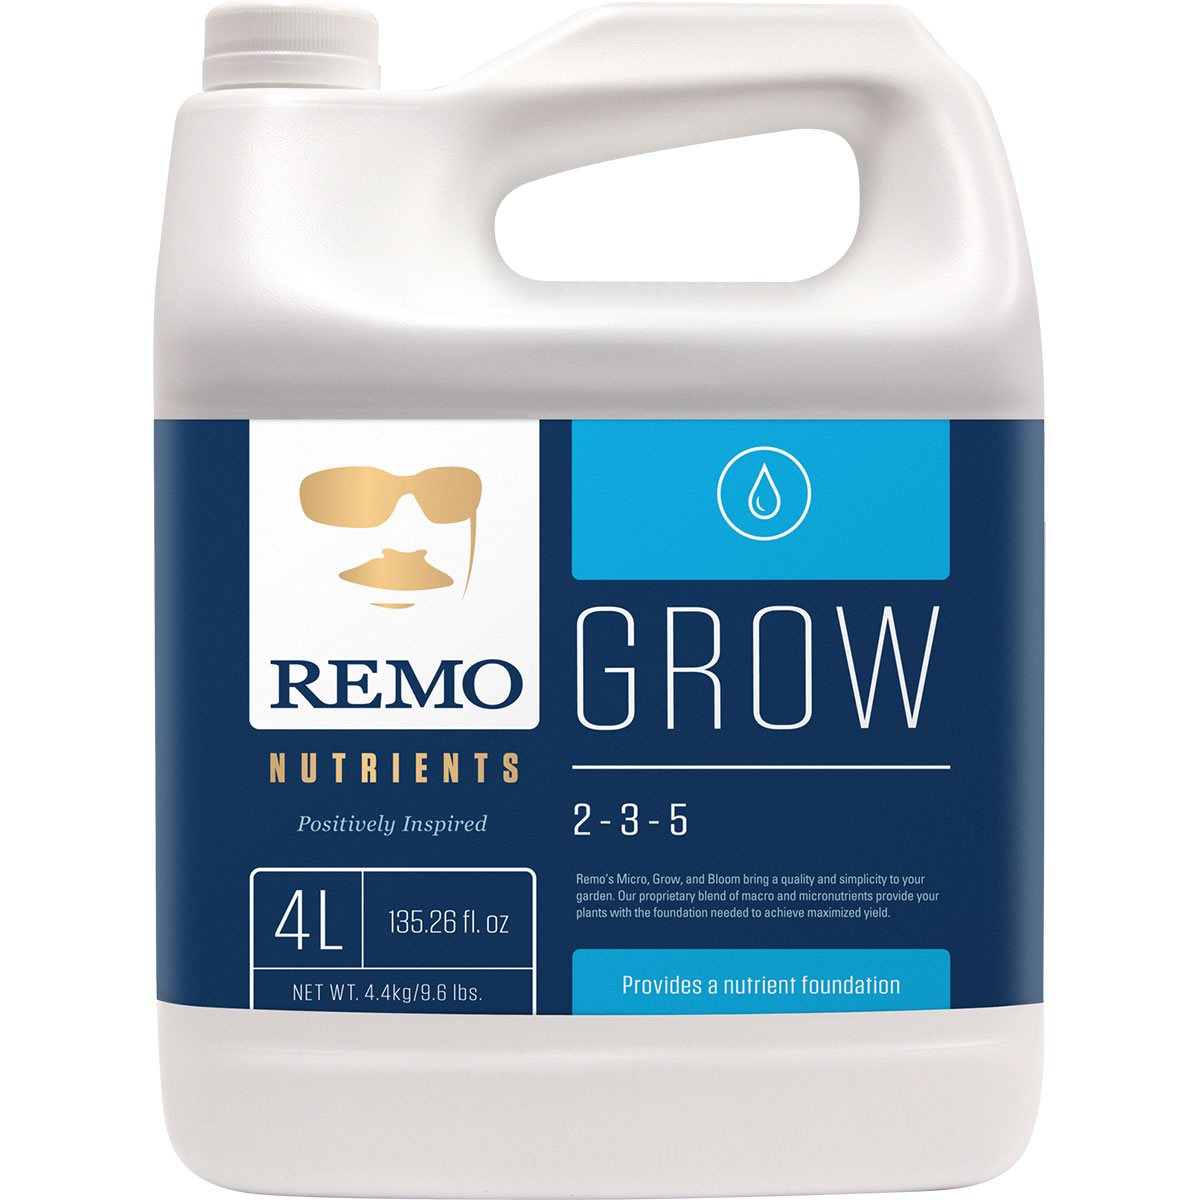 Product Secondary Image:Remo Nutrients Grow (2-3-5)